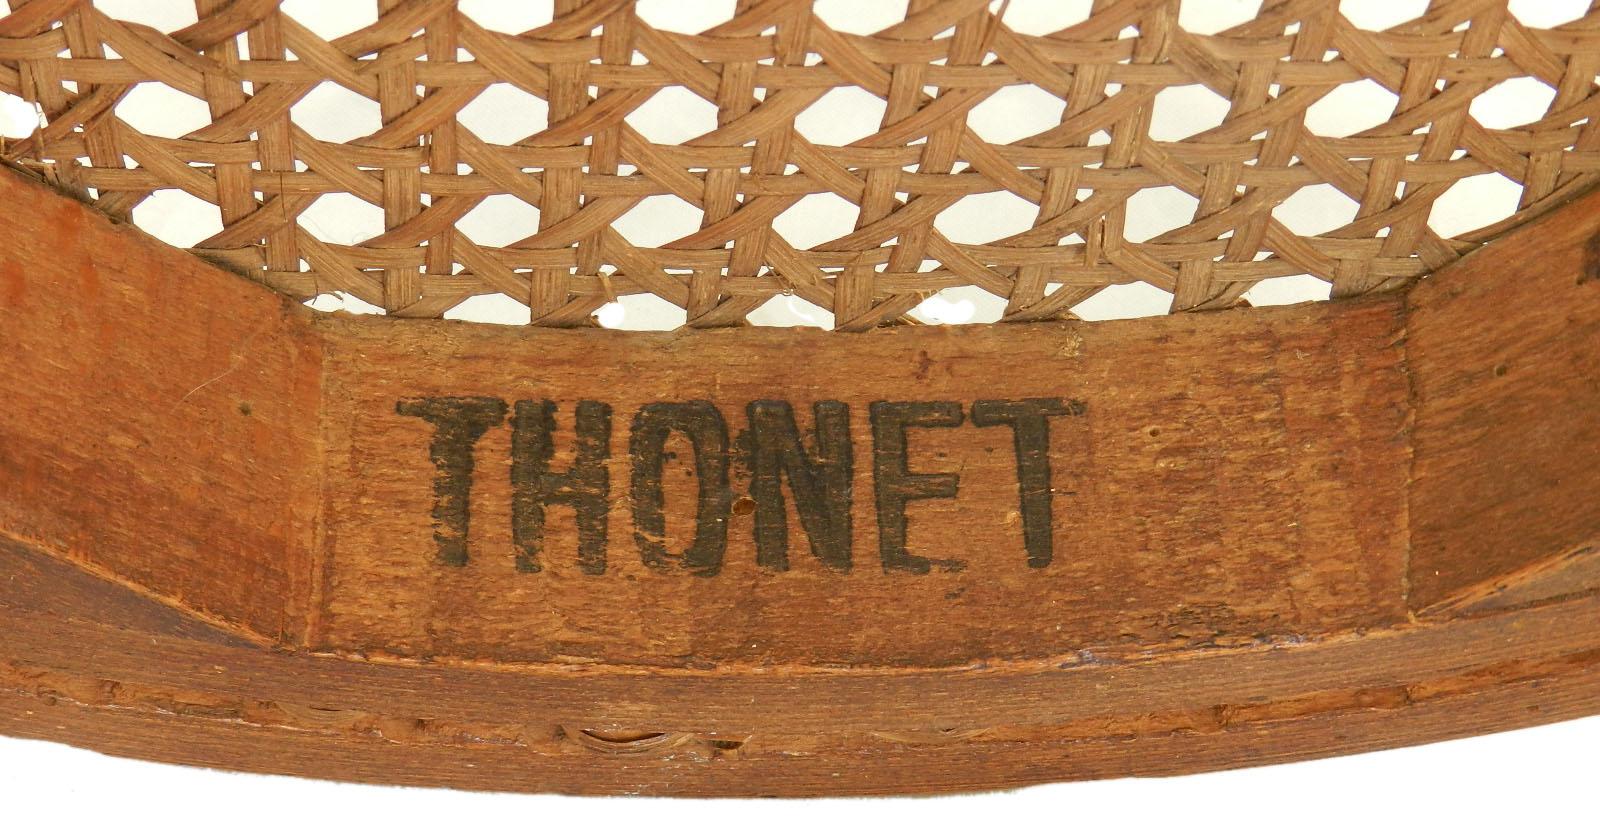 Original Thonet stool with caned seat, circa 1900-1905
Original label and Thonet name stamp
Good vintage condition sound and solid with minor signs of age and use commensurate for its age. 


   